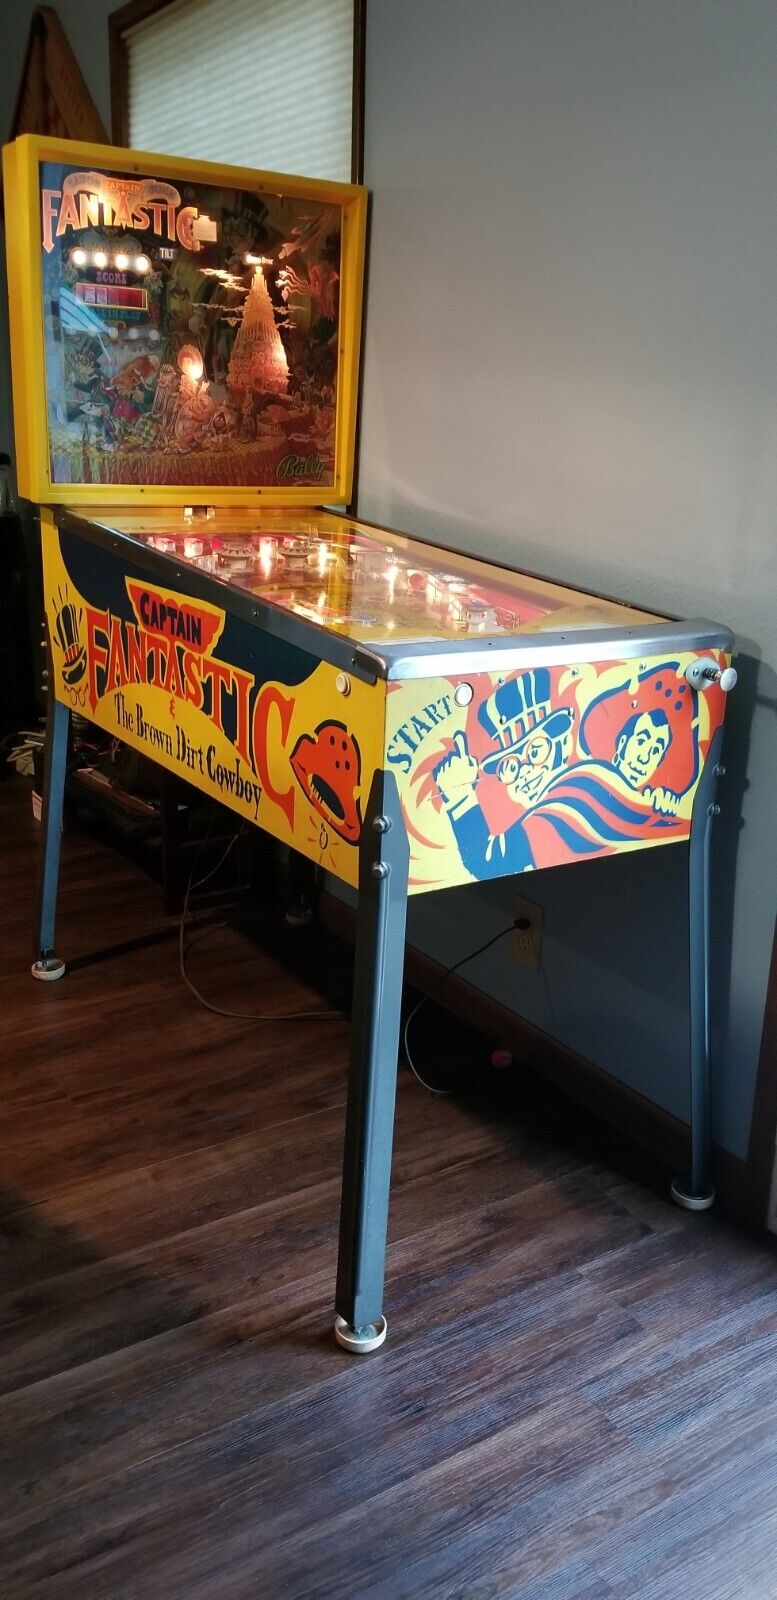 1976 Bally Captain Fantastic Pinball Machine - Home size, perfect size for homes